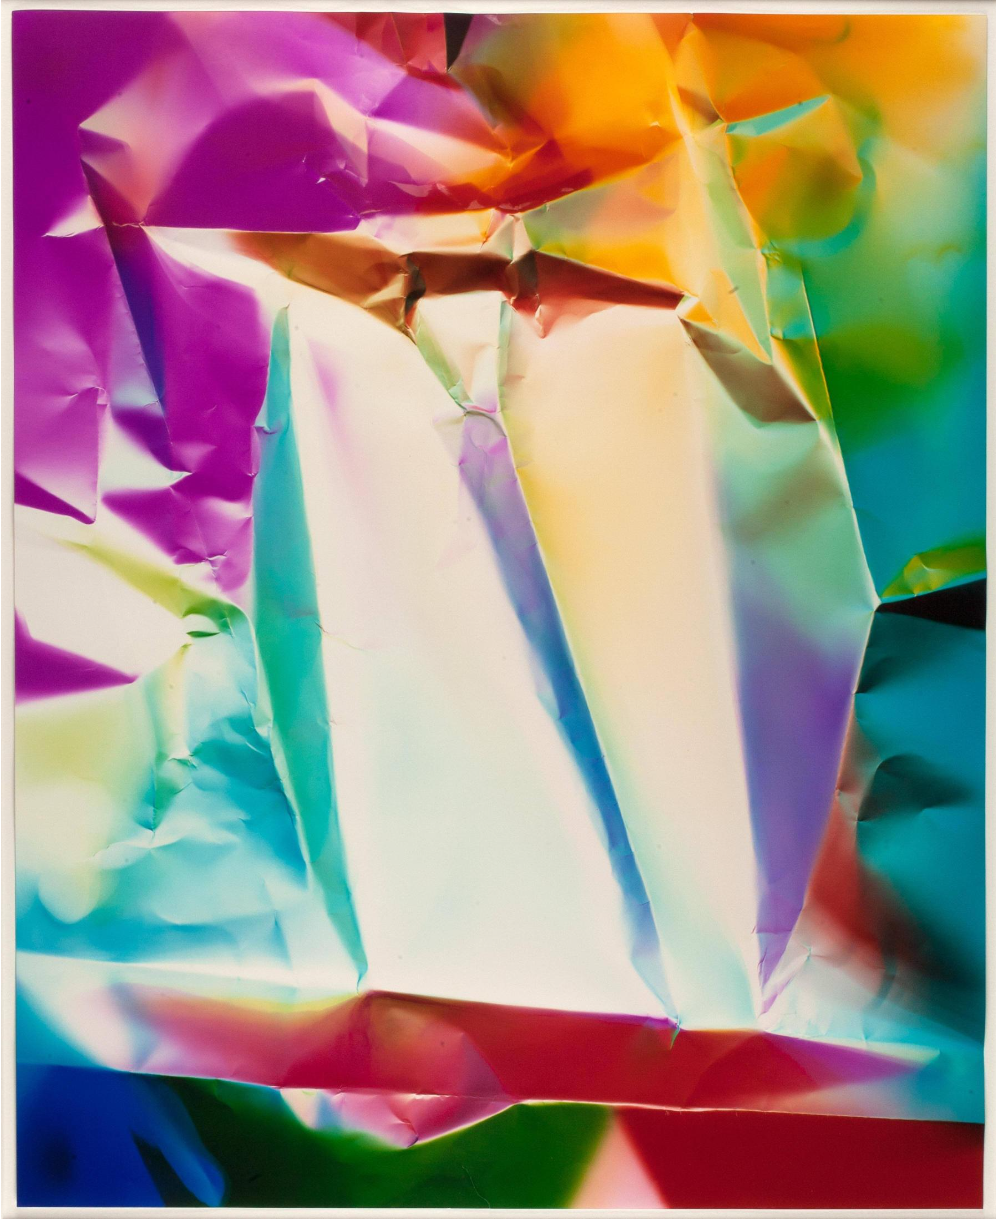 Ellen Carey, "Dings & Shadows," 2013, Color photogram, Frame Dimension: 36 × 32 in. (91.4 × 81.3 cm) Sheet Dimension: 24 × 20 in. (61 × 50.8 cm), Gift of the Artist in memory of her parents, 2014.85